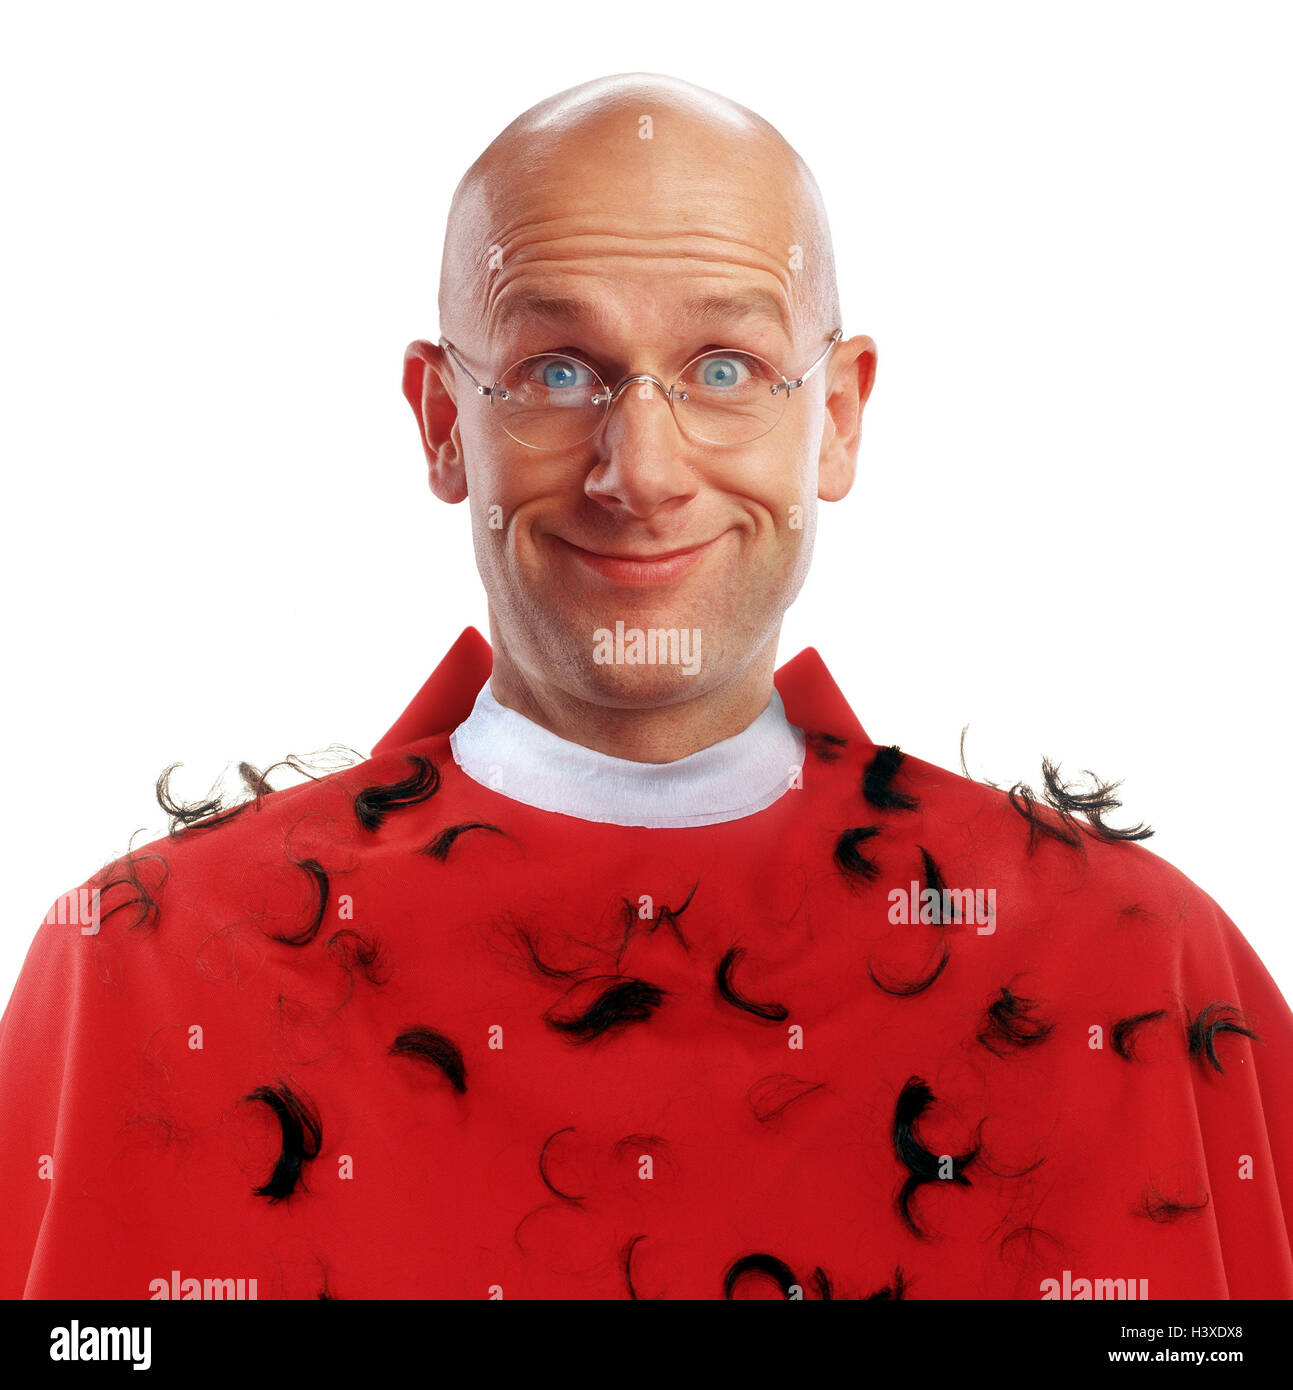 Man, hairdresser's visit, bald head, cape, strands hair, facial play, portrait, Men, hairdresser, hairdresser's cape, red, hair cutting edges, hairs, cut, haircut, head, bald, shaves, scalp, smile, there, smile, studio, cut outs, Stock Photo